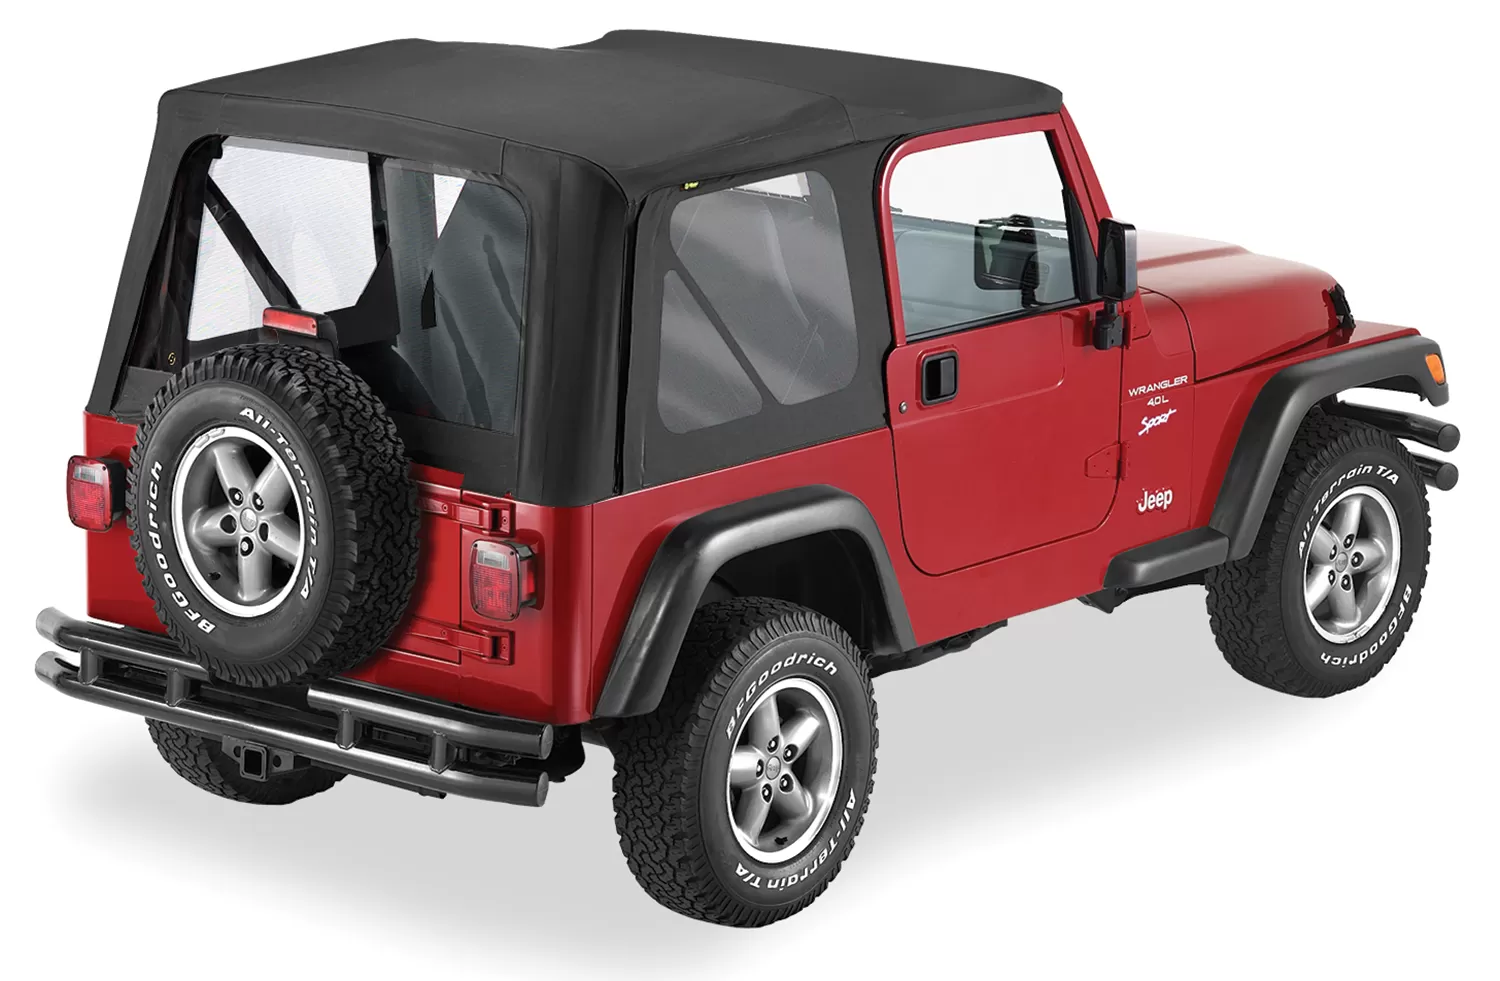 Pavement Ends By Bestop Black Denim Replay OEM Replacement Soft Top Clear Windows Jeep Wrangler 1997-2006 - 51198-15